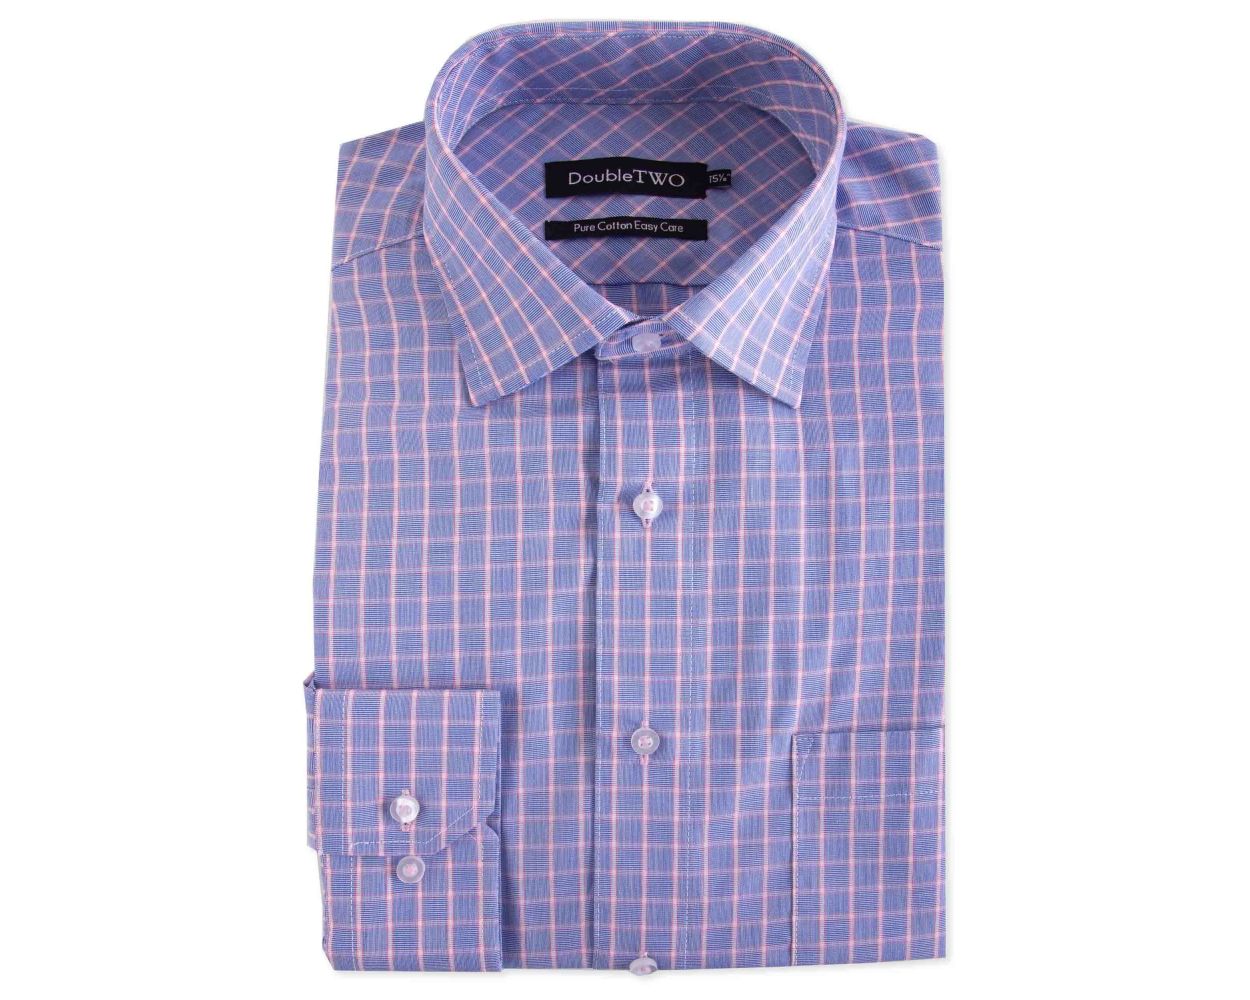 Men's Blue and Pink Grid Check Formal Shirt | Double TWO